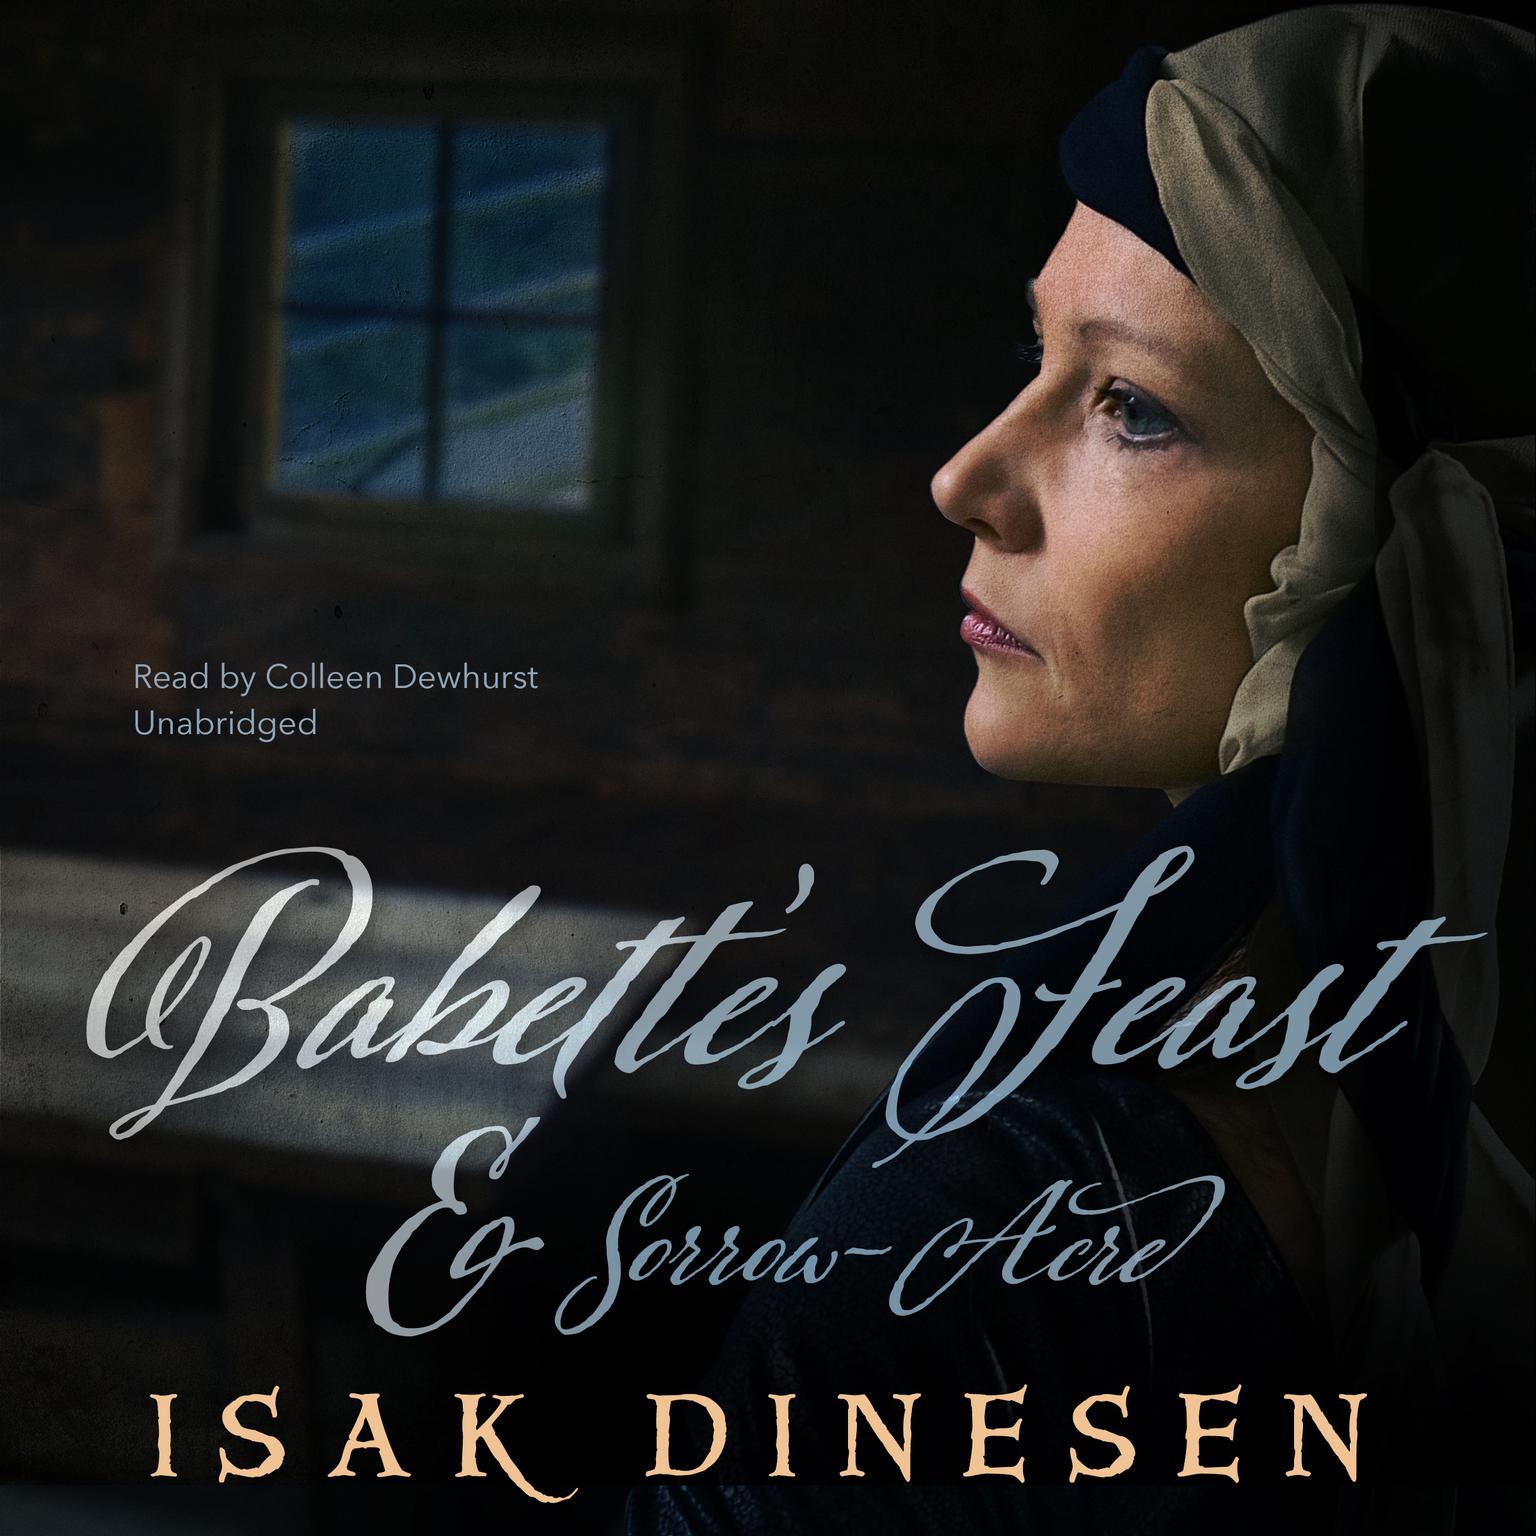 “Babette’s Feast” and “Sorrow-Acre” Audiobook, by Isak Dinesen